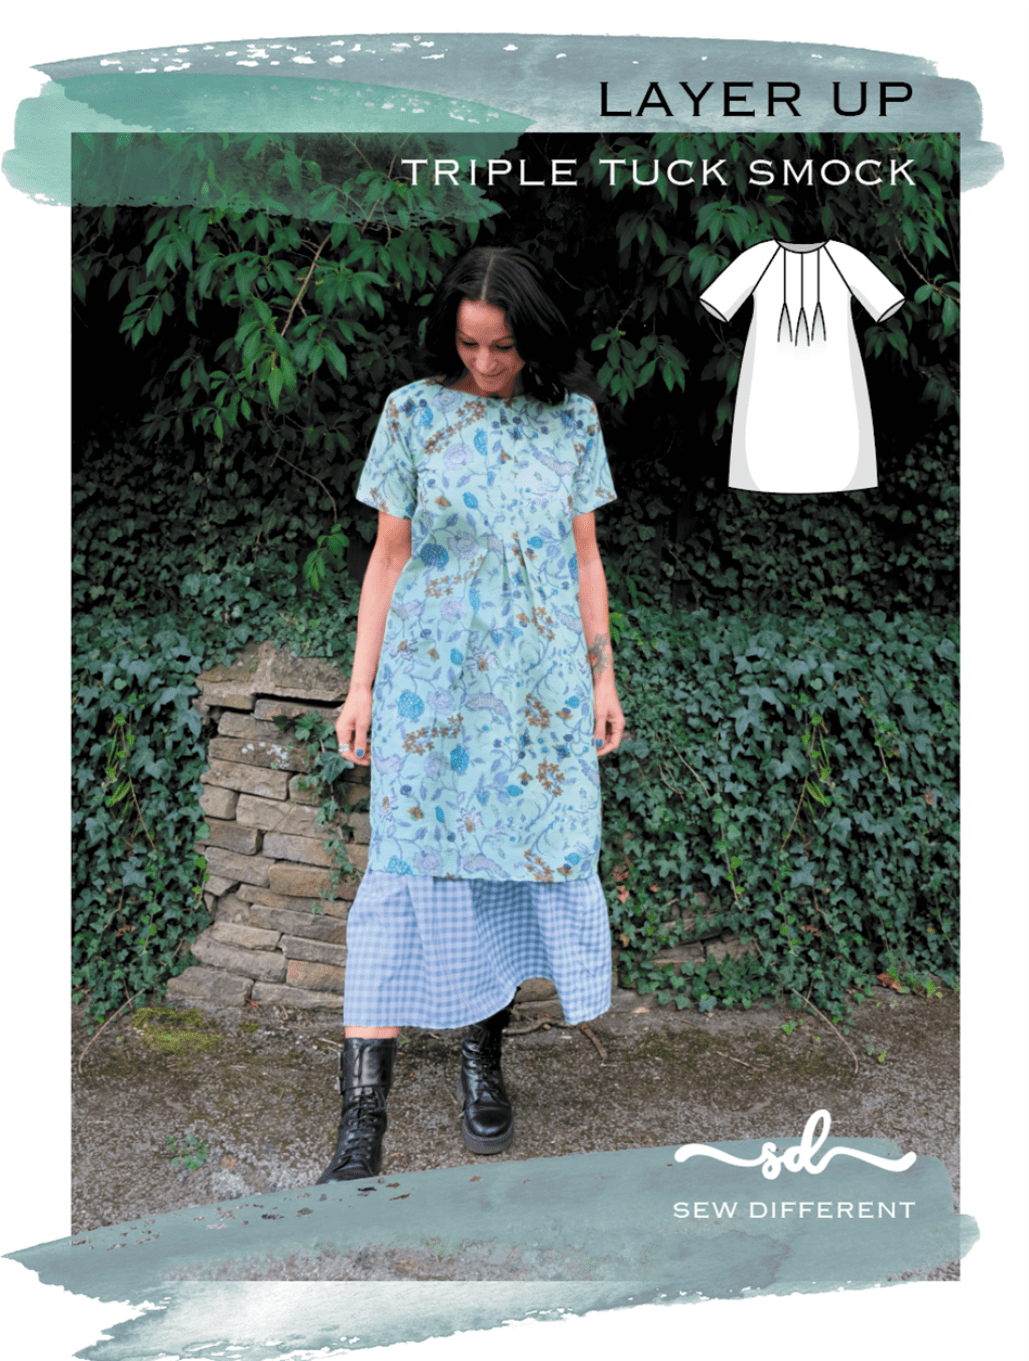 Sew Different: Triple Tuck Smock